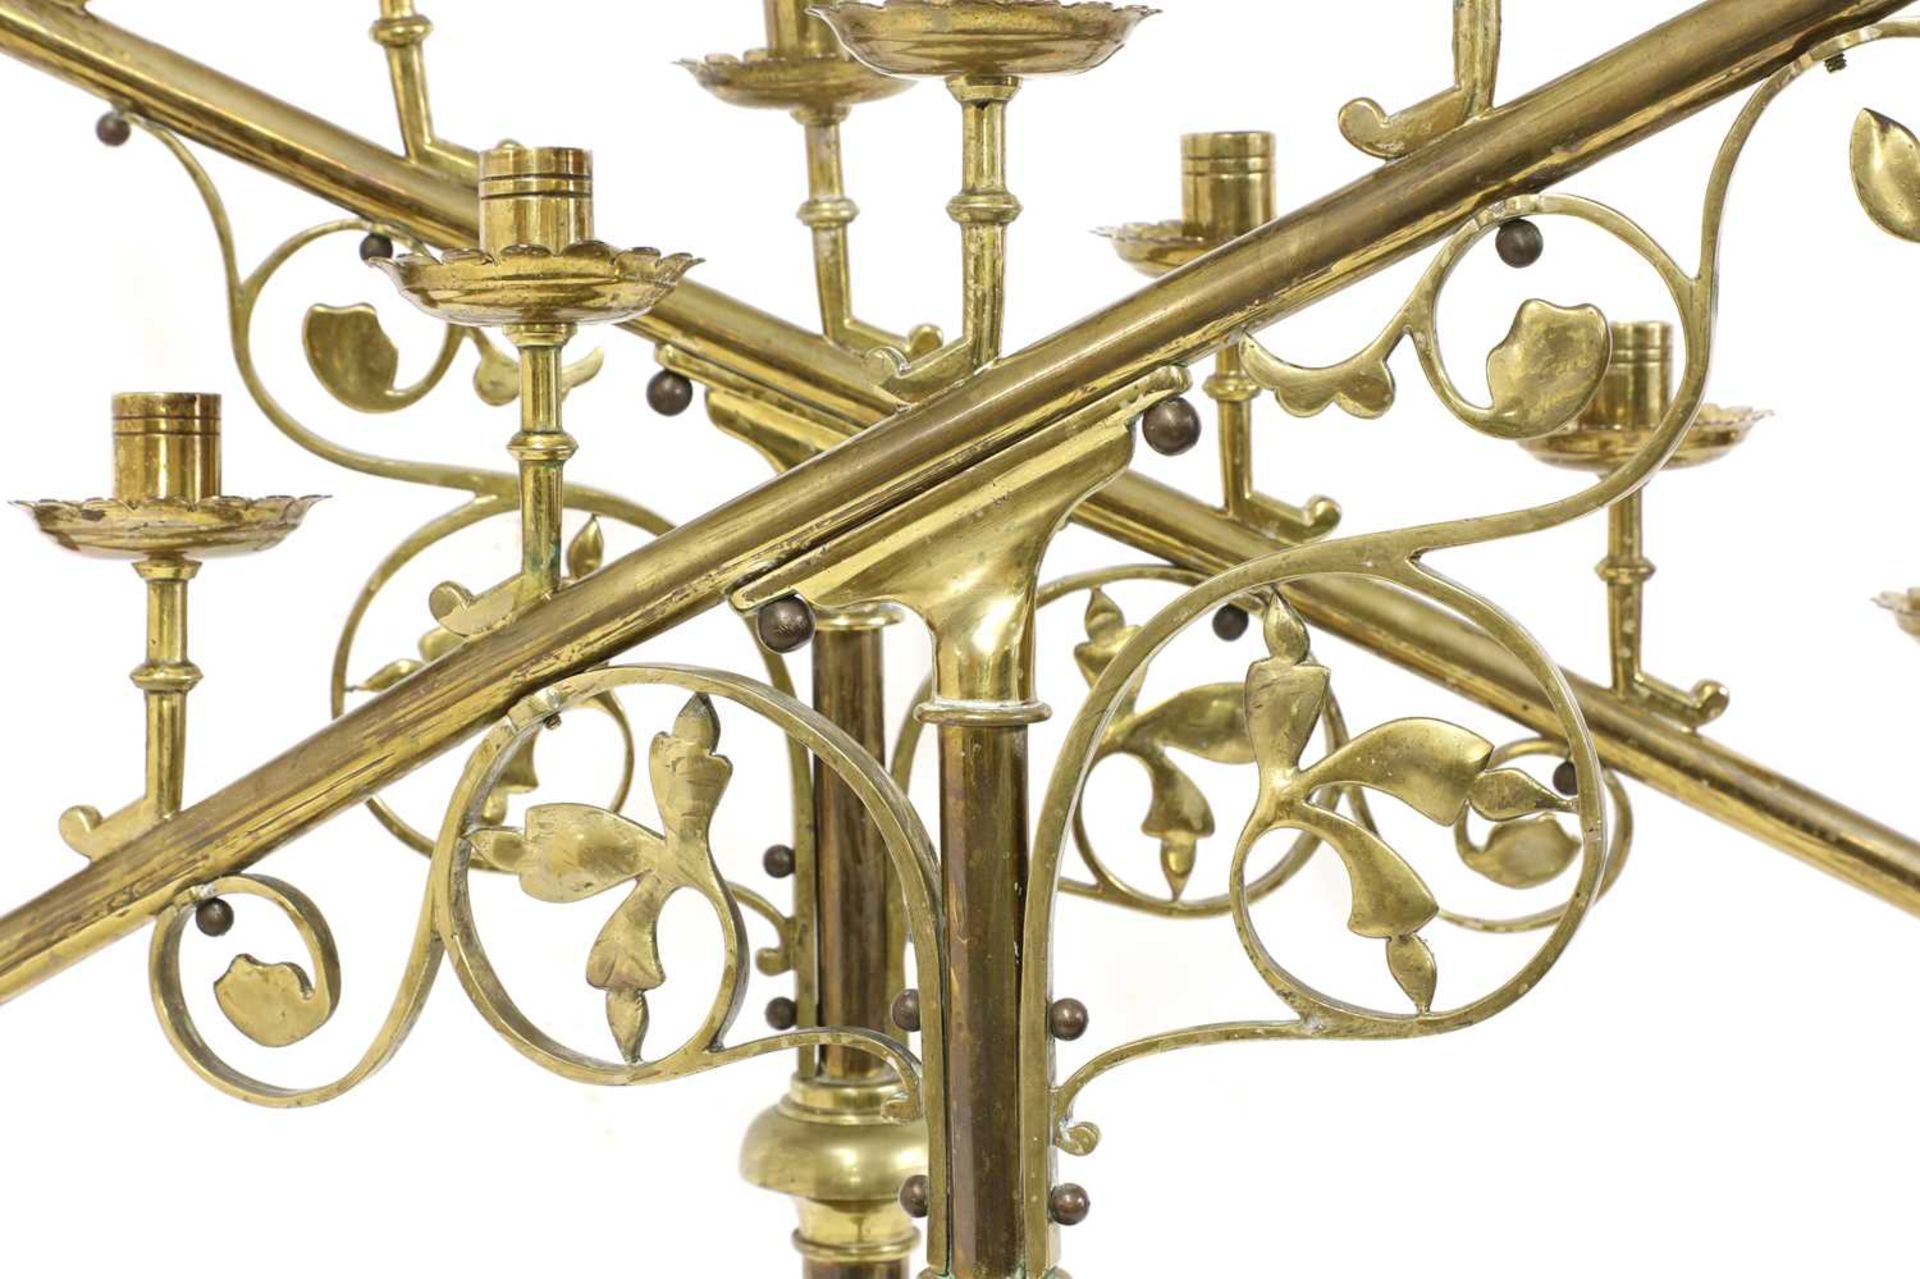 A pair of brass ecclesiastical candlesticks - Image 4 of 4